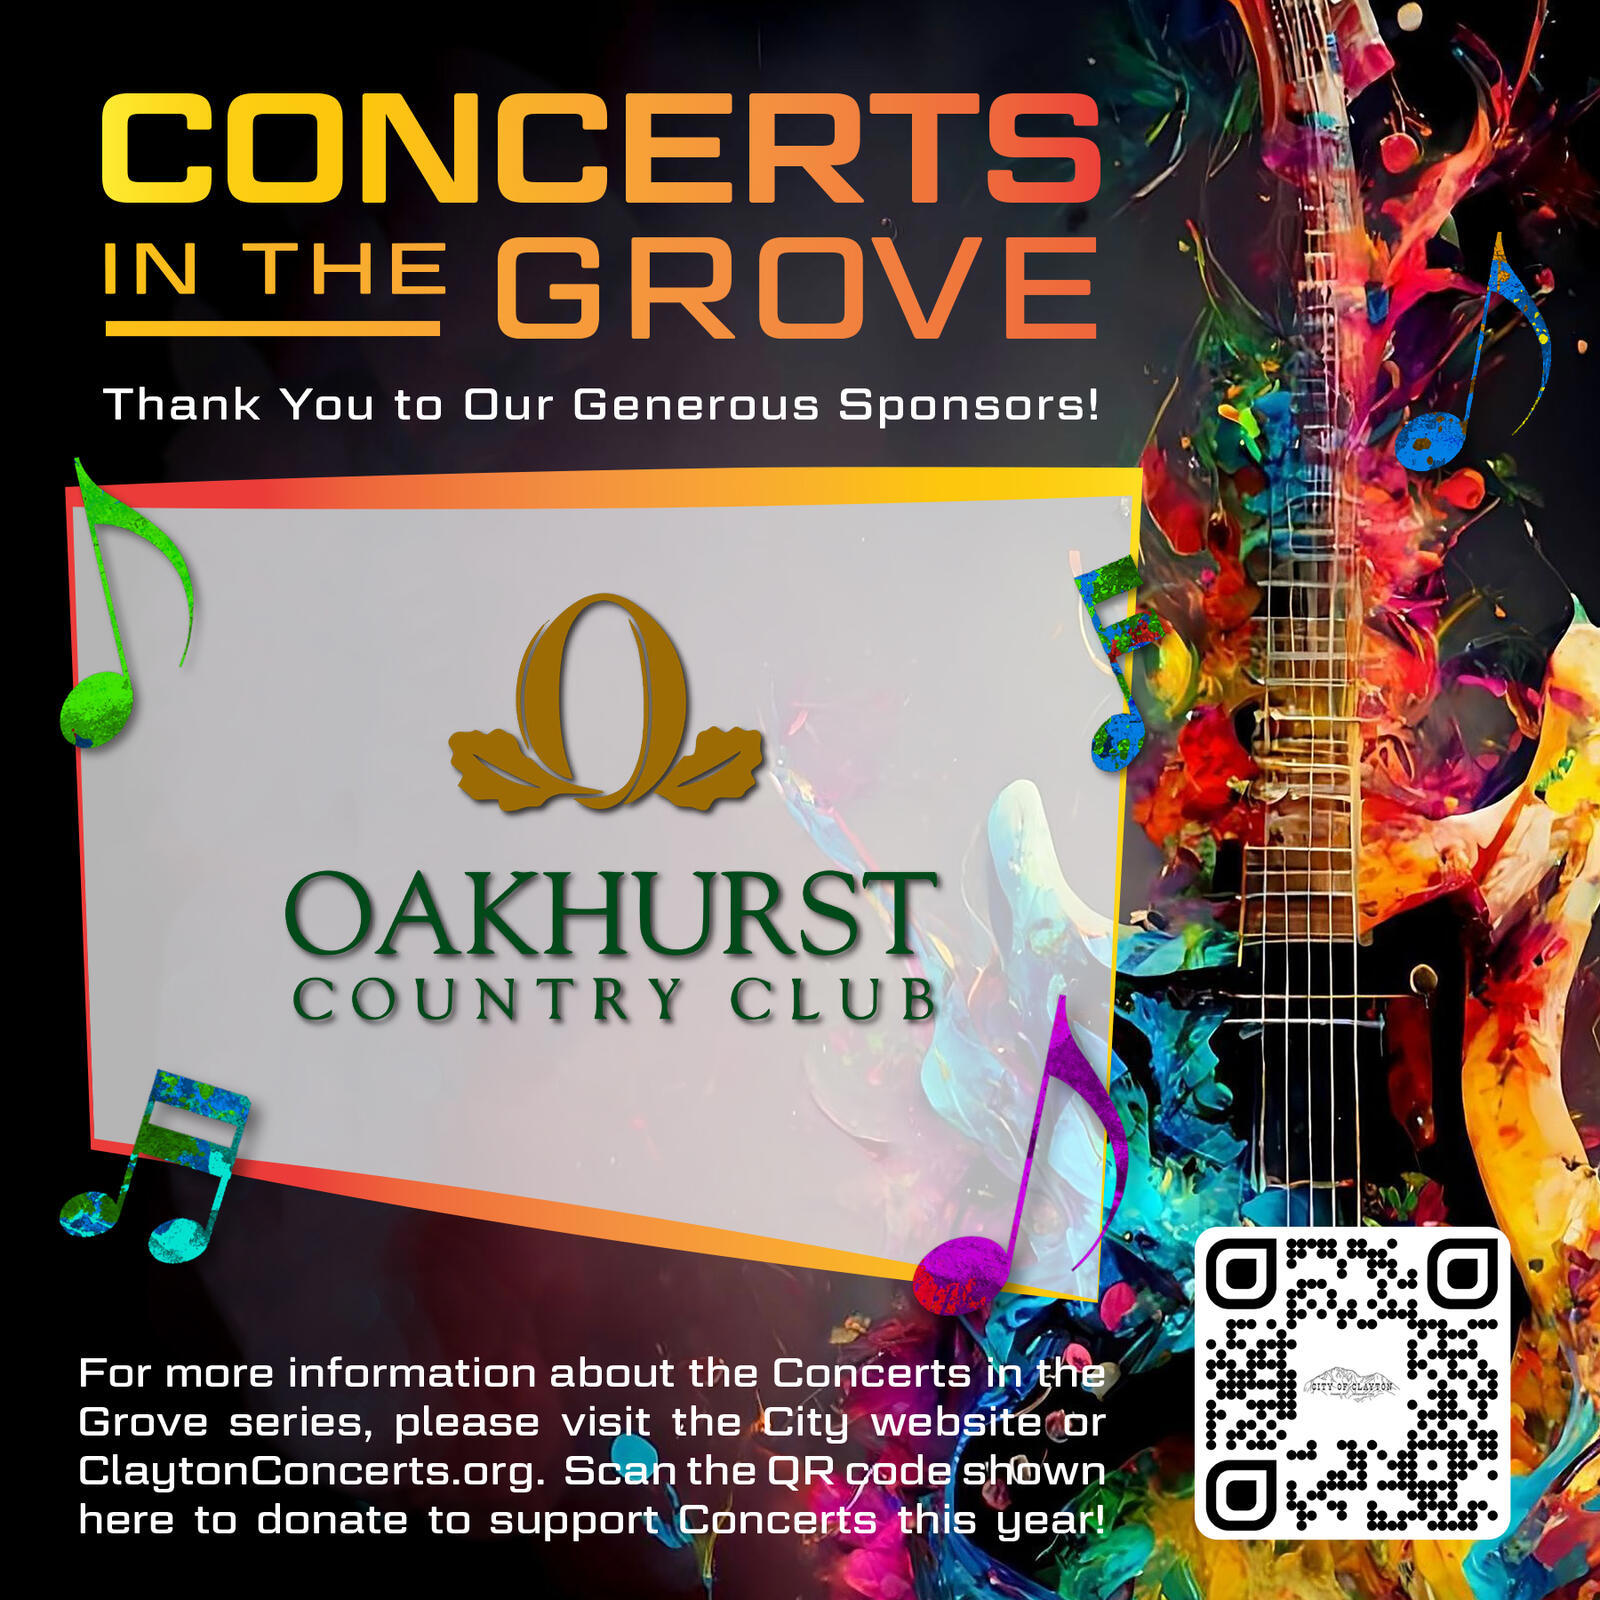 Thank you to Major Sponsor Oakhurst Country Club for supporting